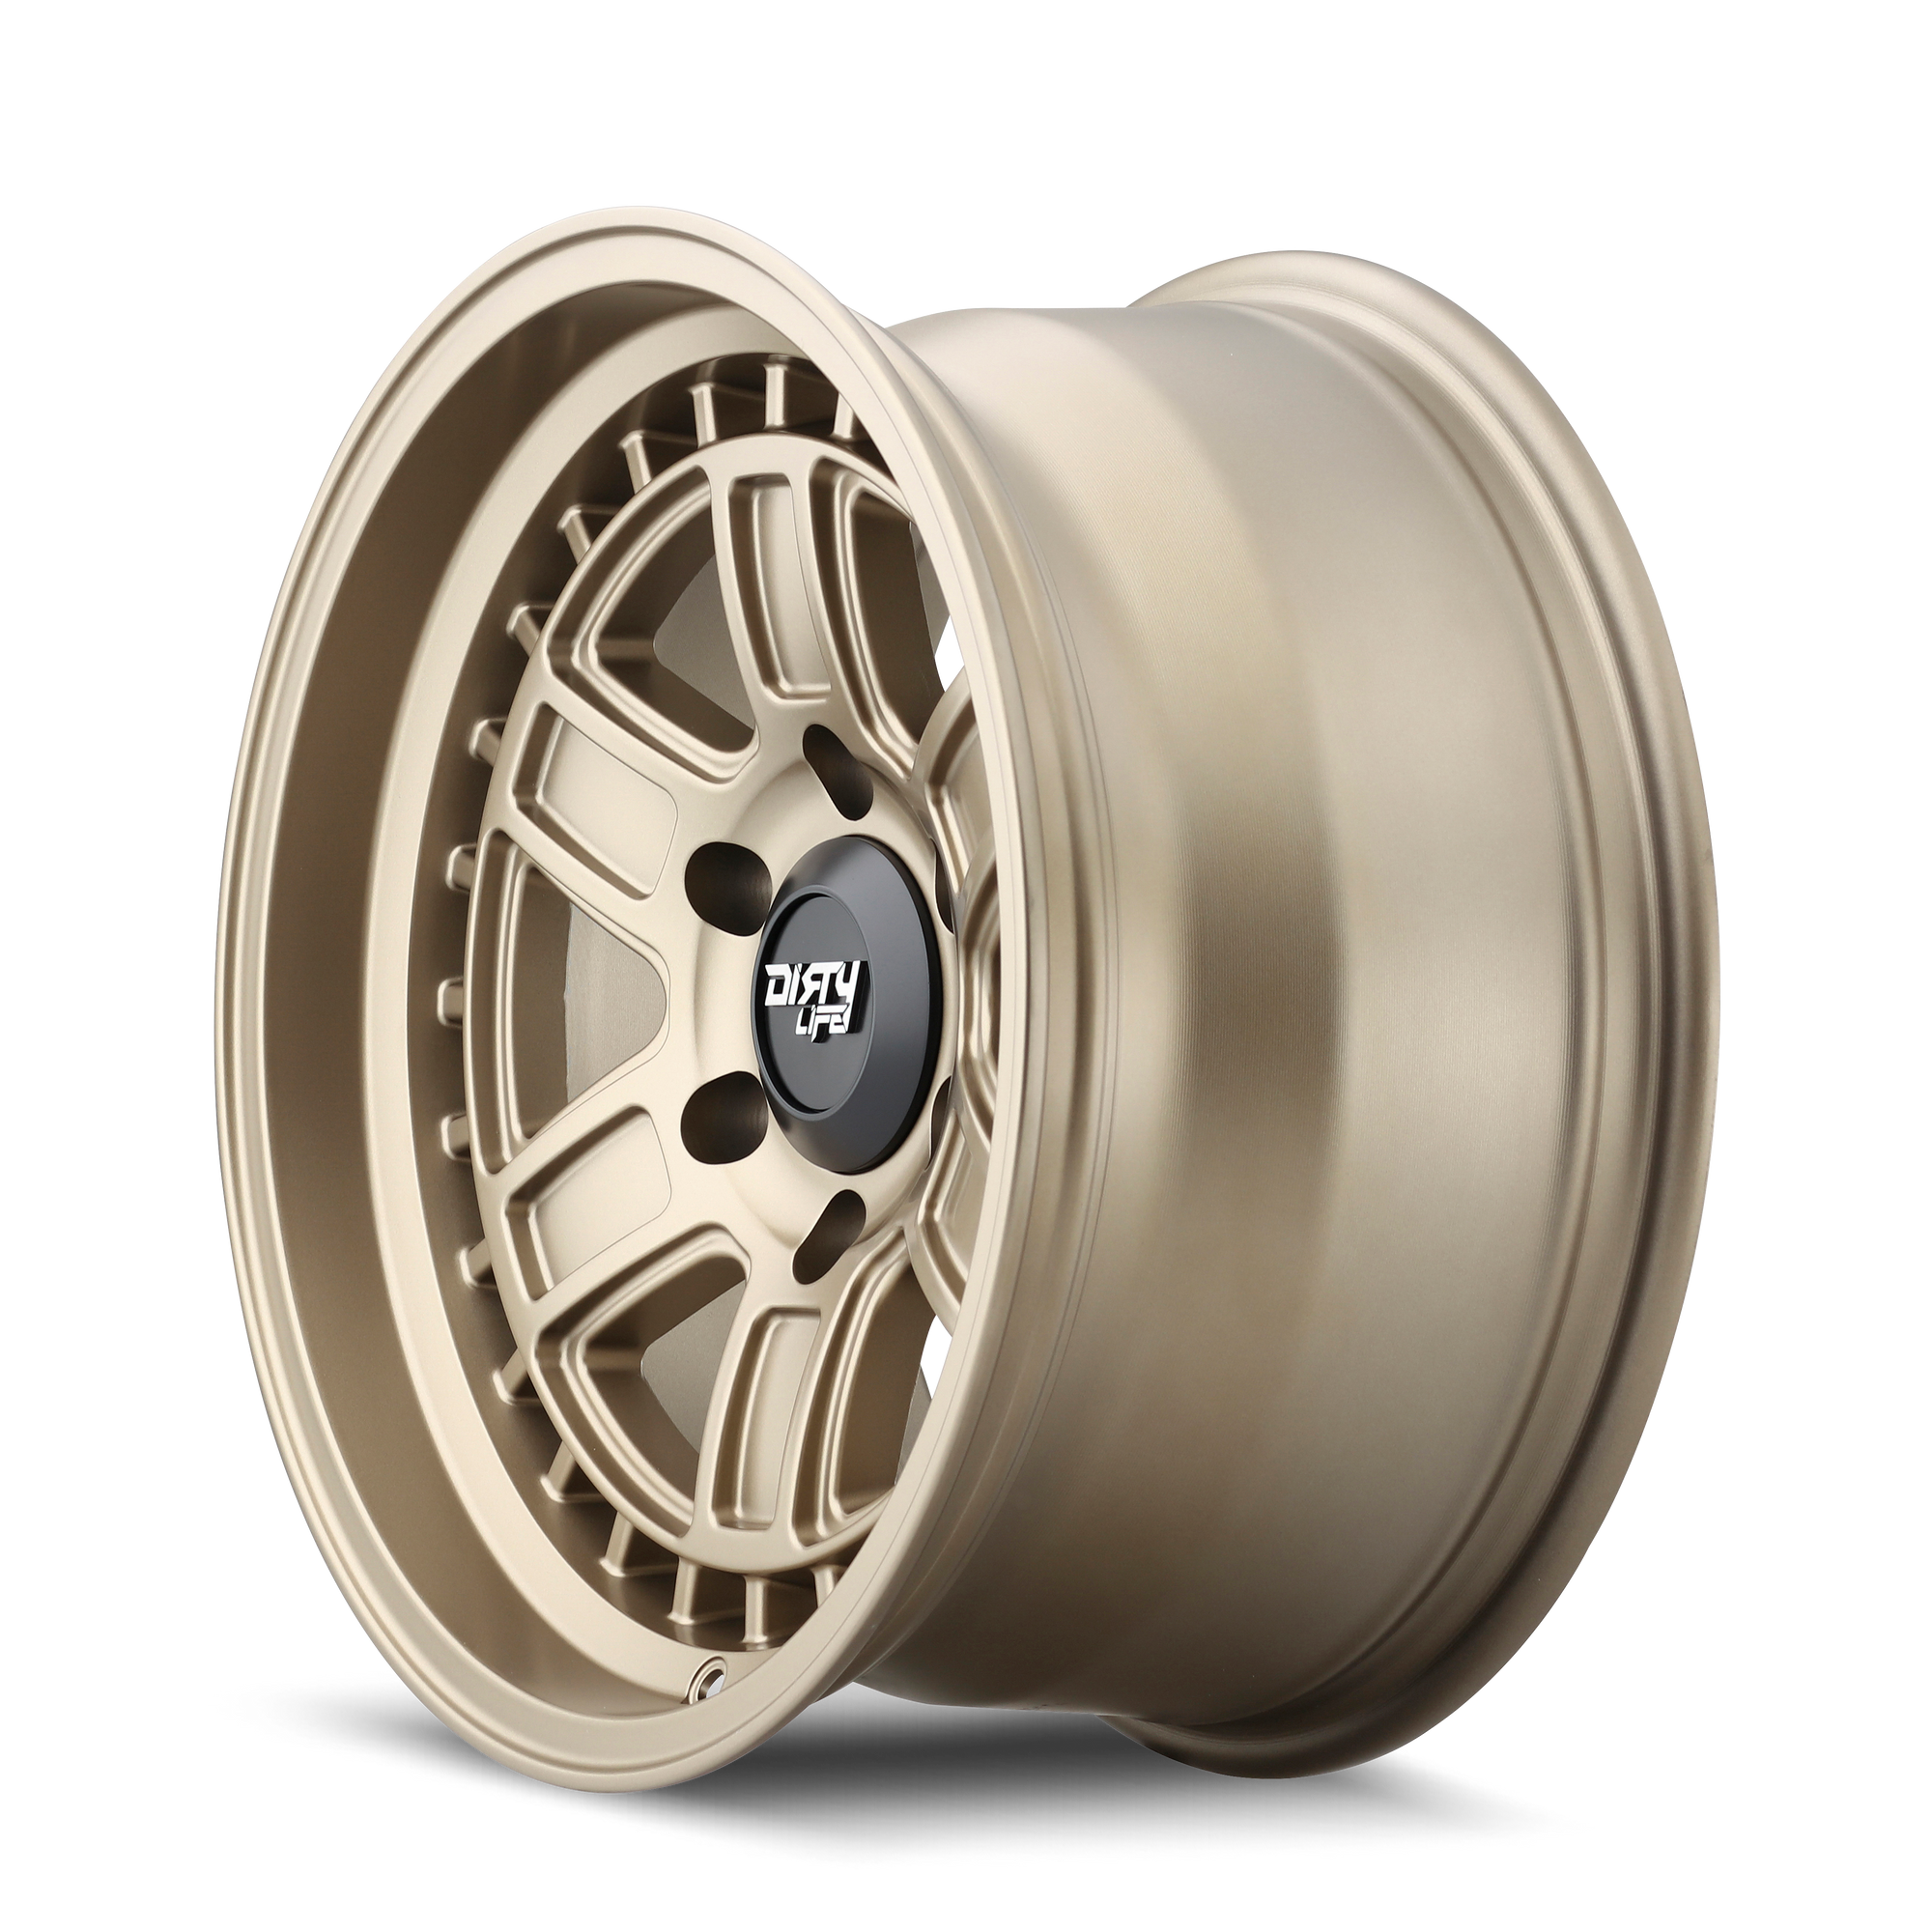 Dirty Life CAGE Matte gold 17x8.5 -6 6x120mm 66.9mm